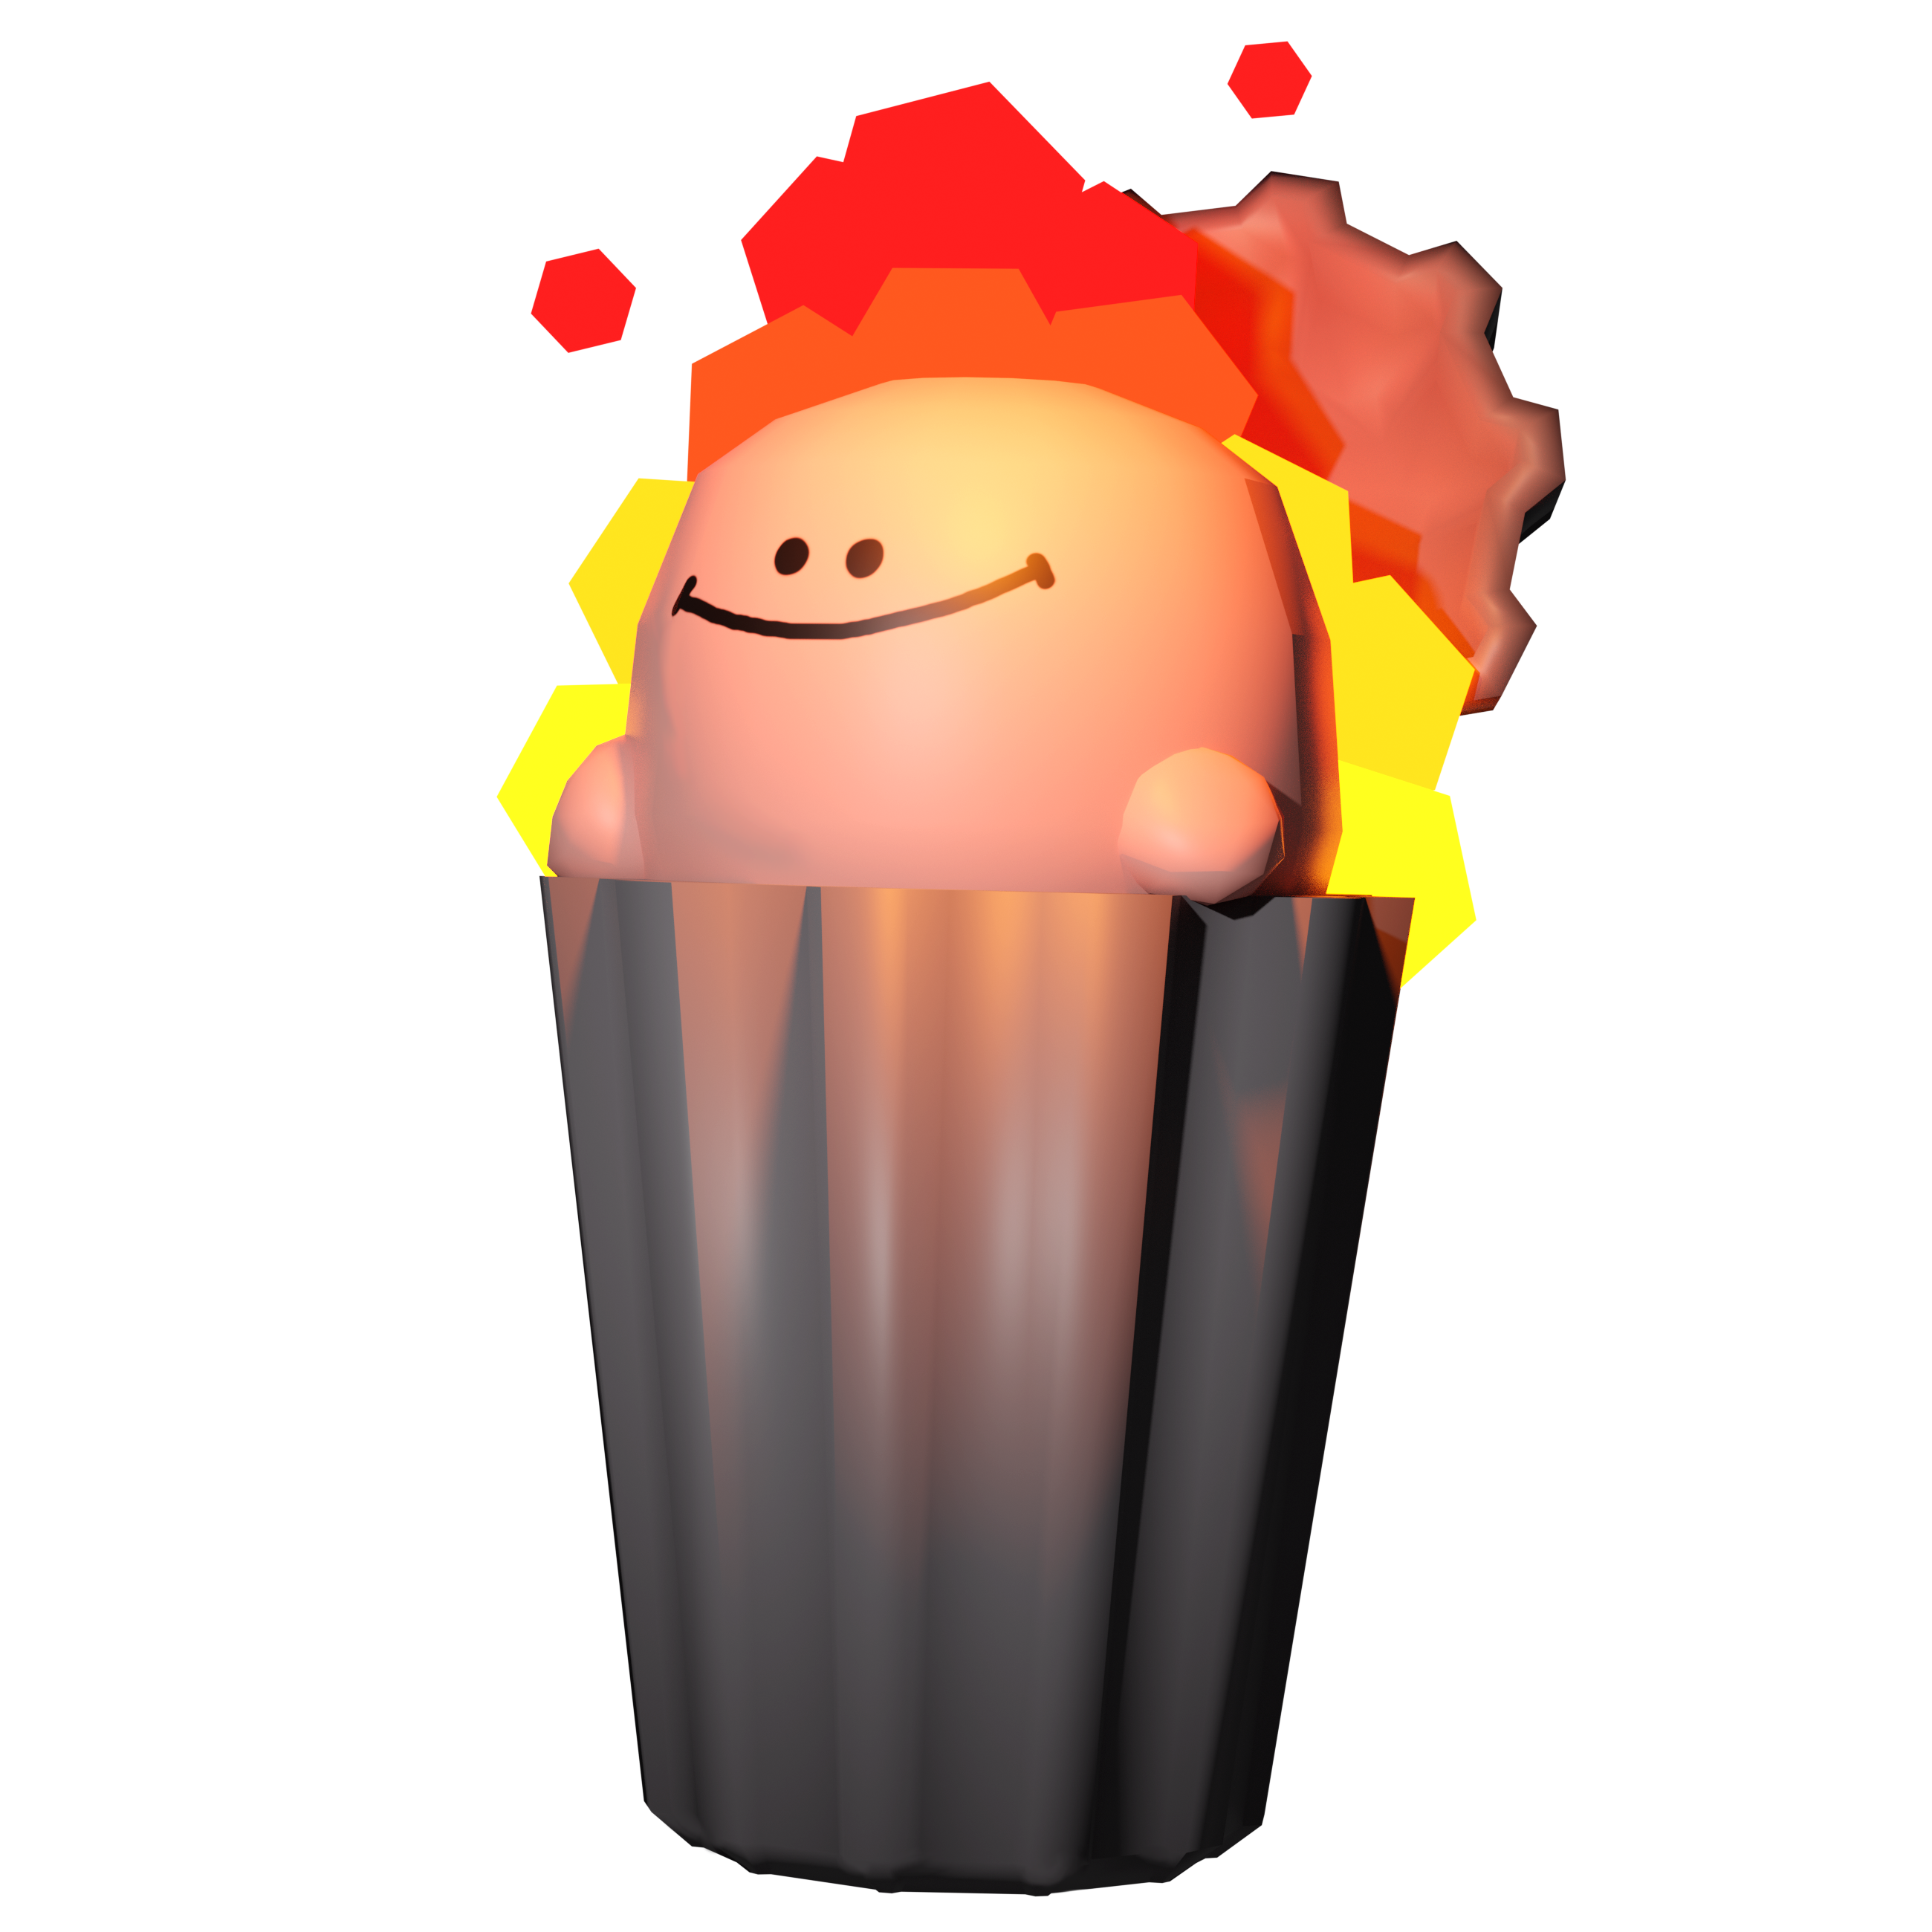 Dumpster Child Tower Heroes Wiki Fandom - roblox tower heroes hot dog frank